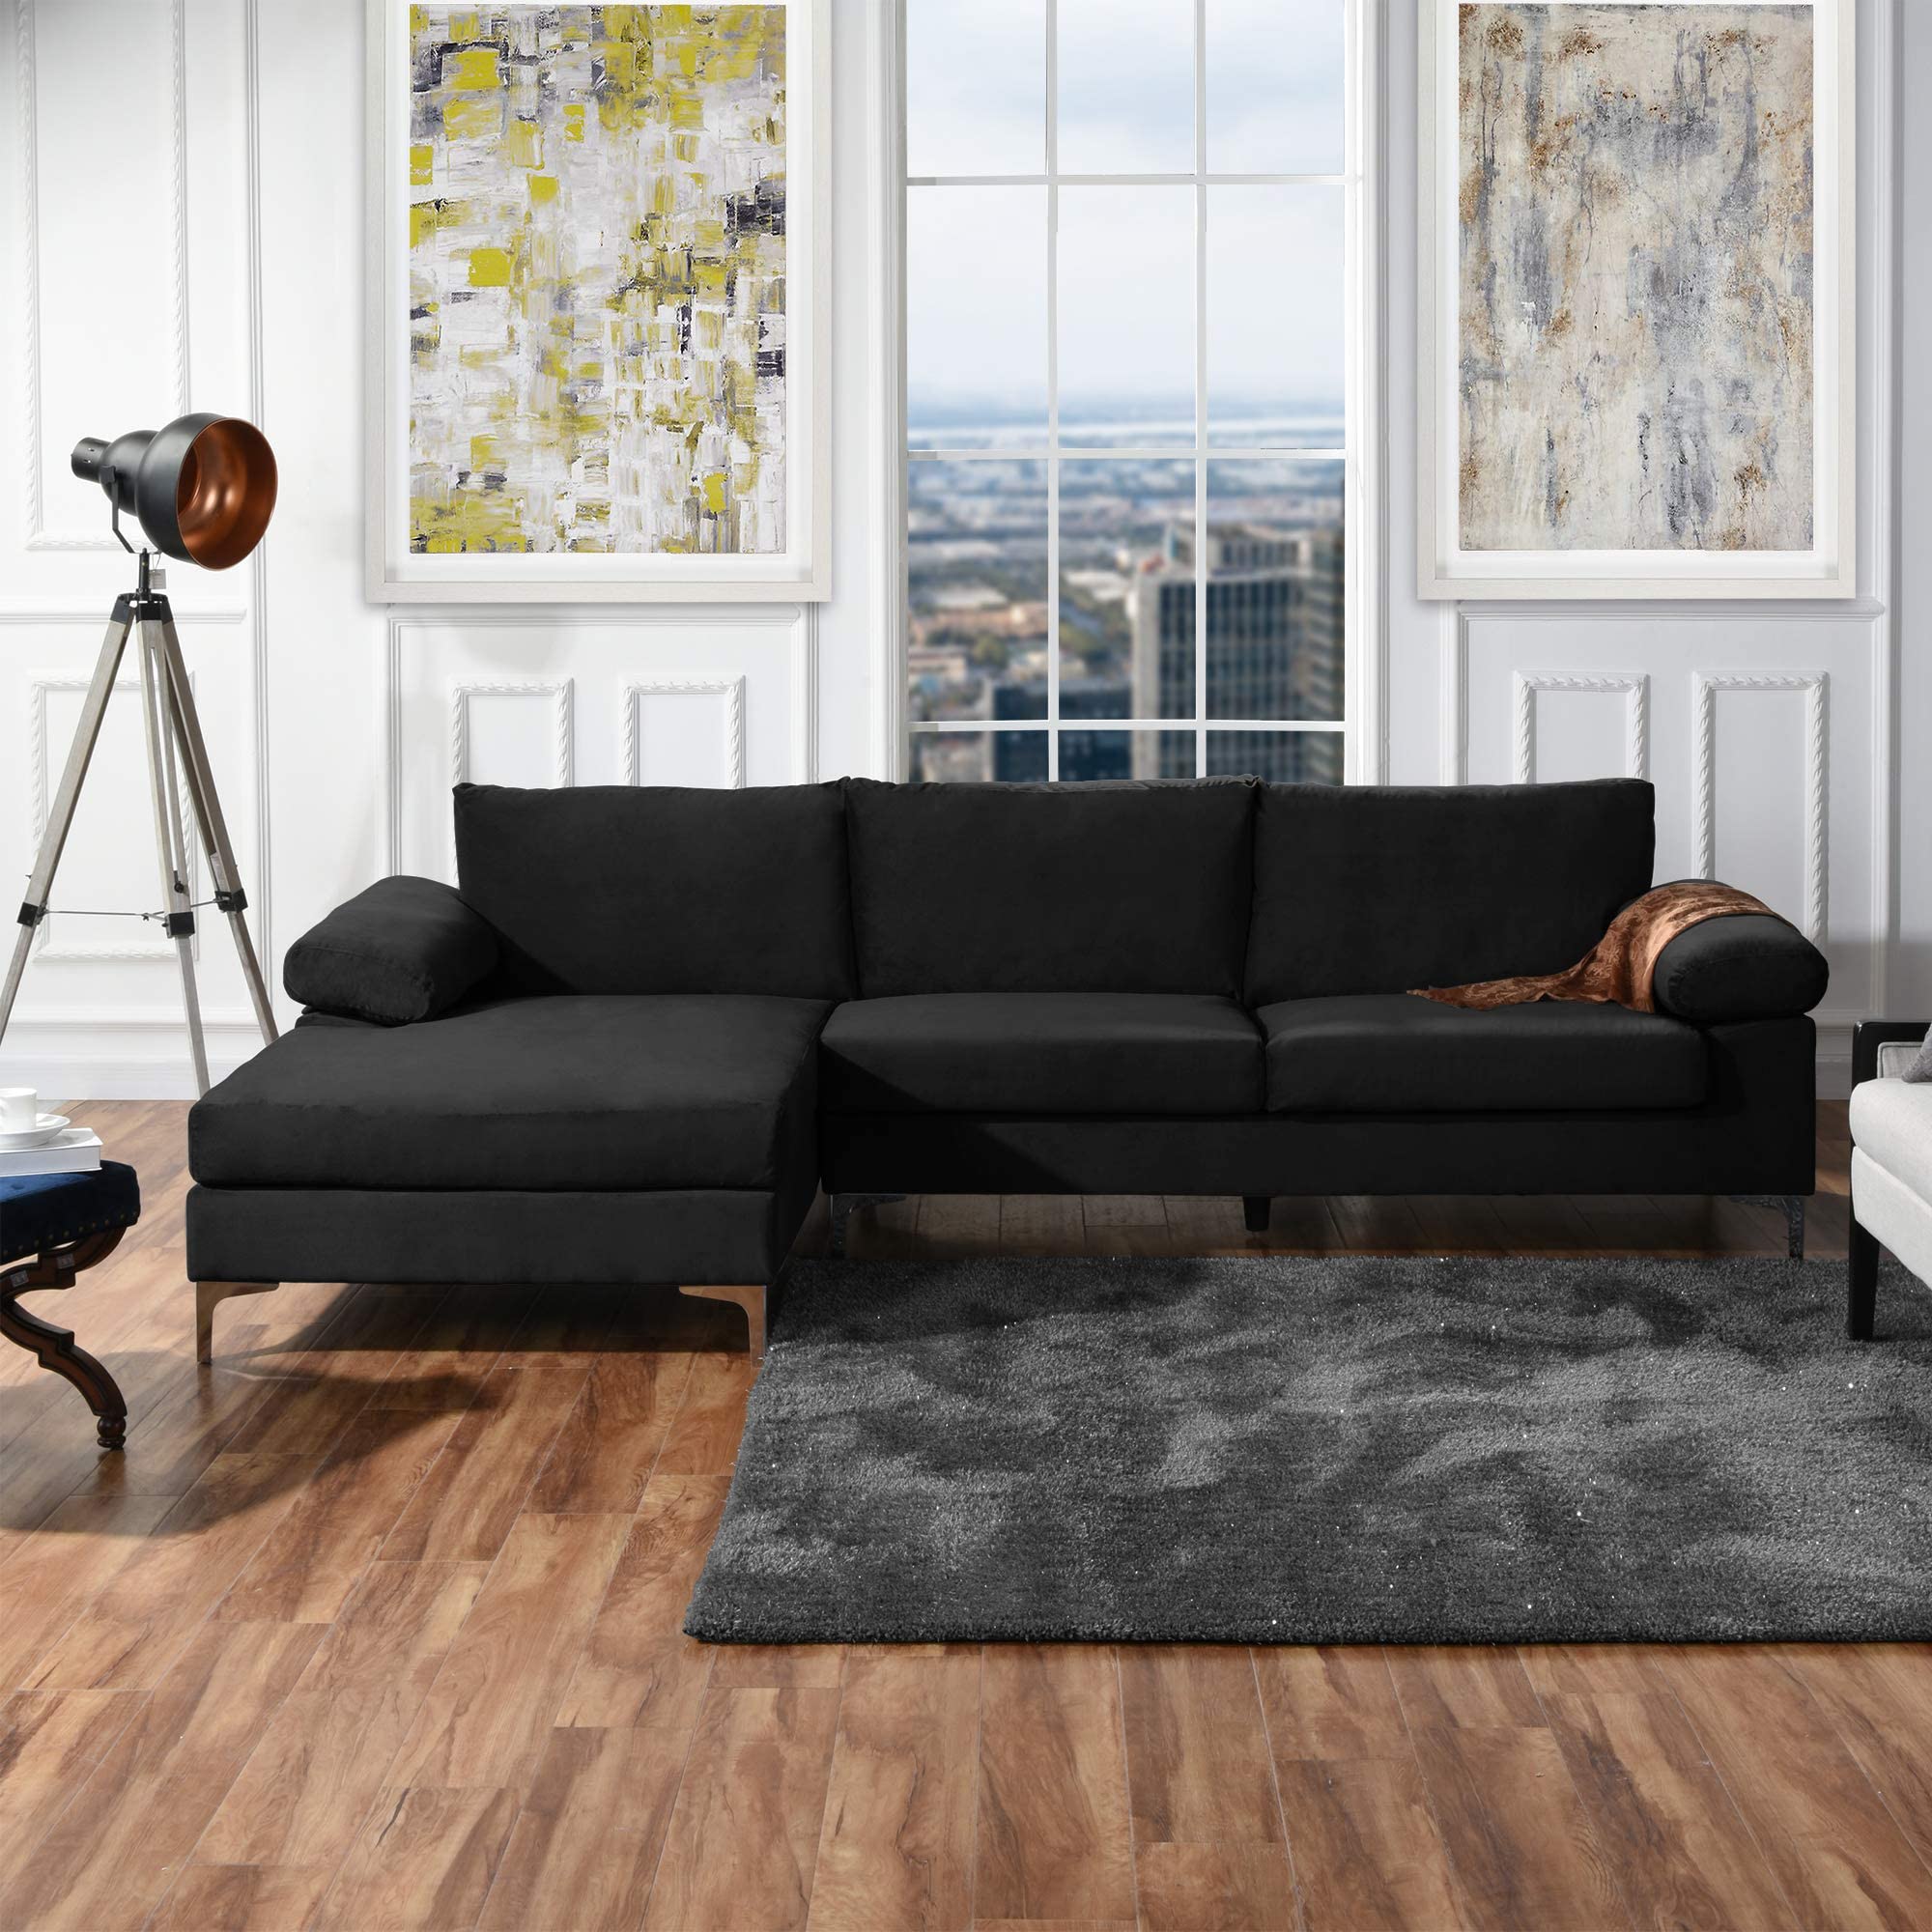 Casa Andrea Milano llc Modern Large Velvet Fabric Sectional Sofa, L-Shape Couch with Extra Wide Chaise Lounge, Coal Black